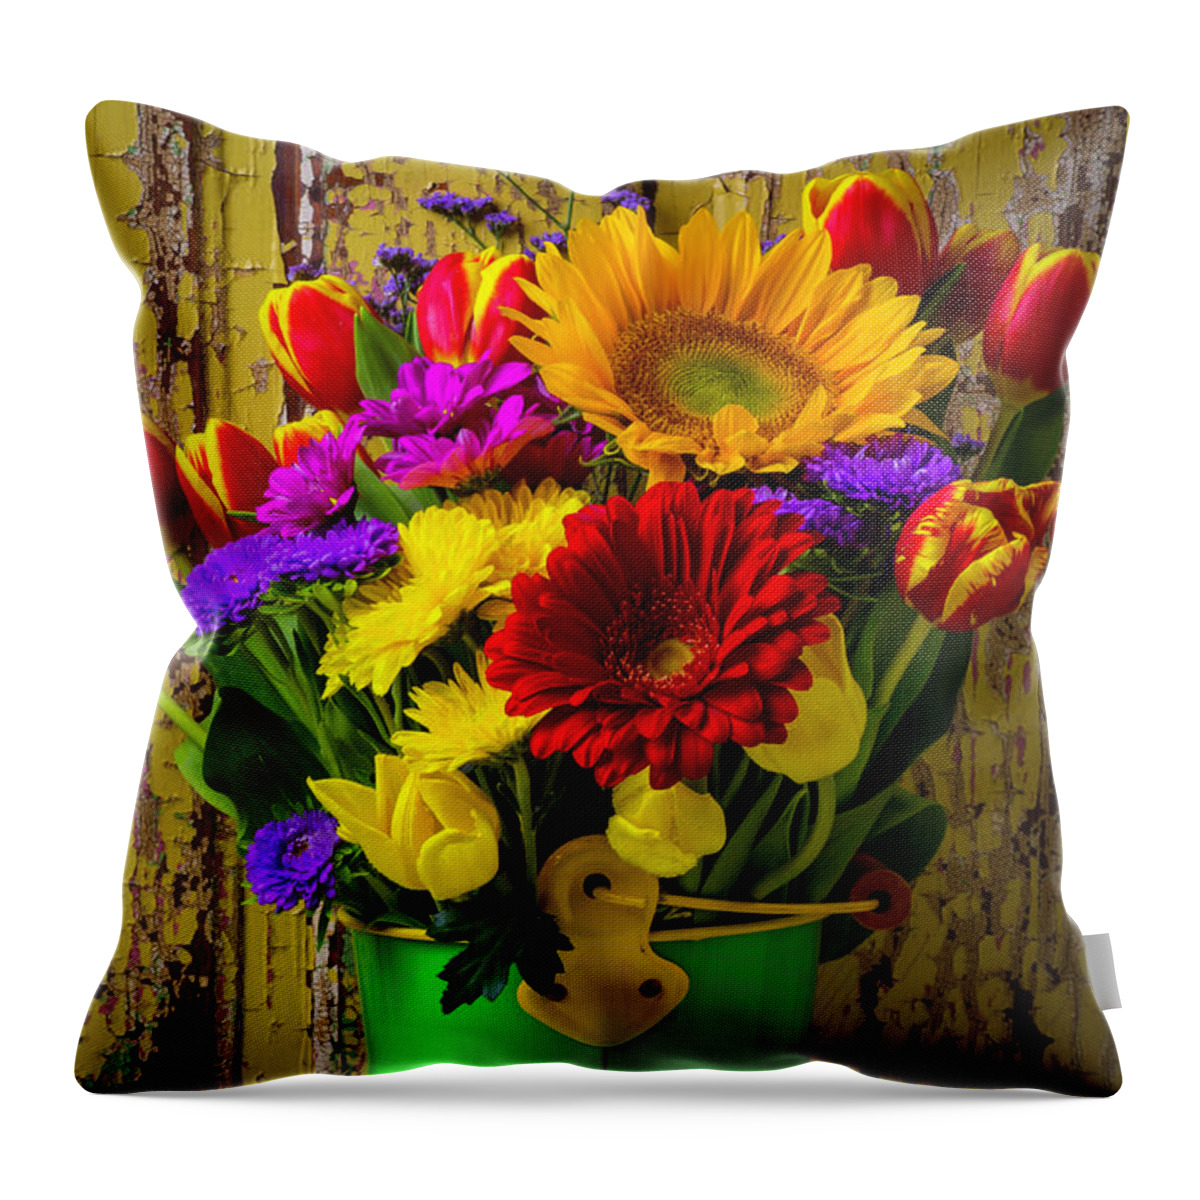 Red Throw Pillow featuring the photograph Green Bucket Of Spring Flowers by Garry Gay